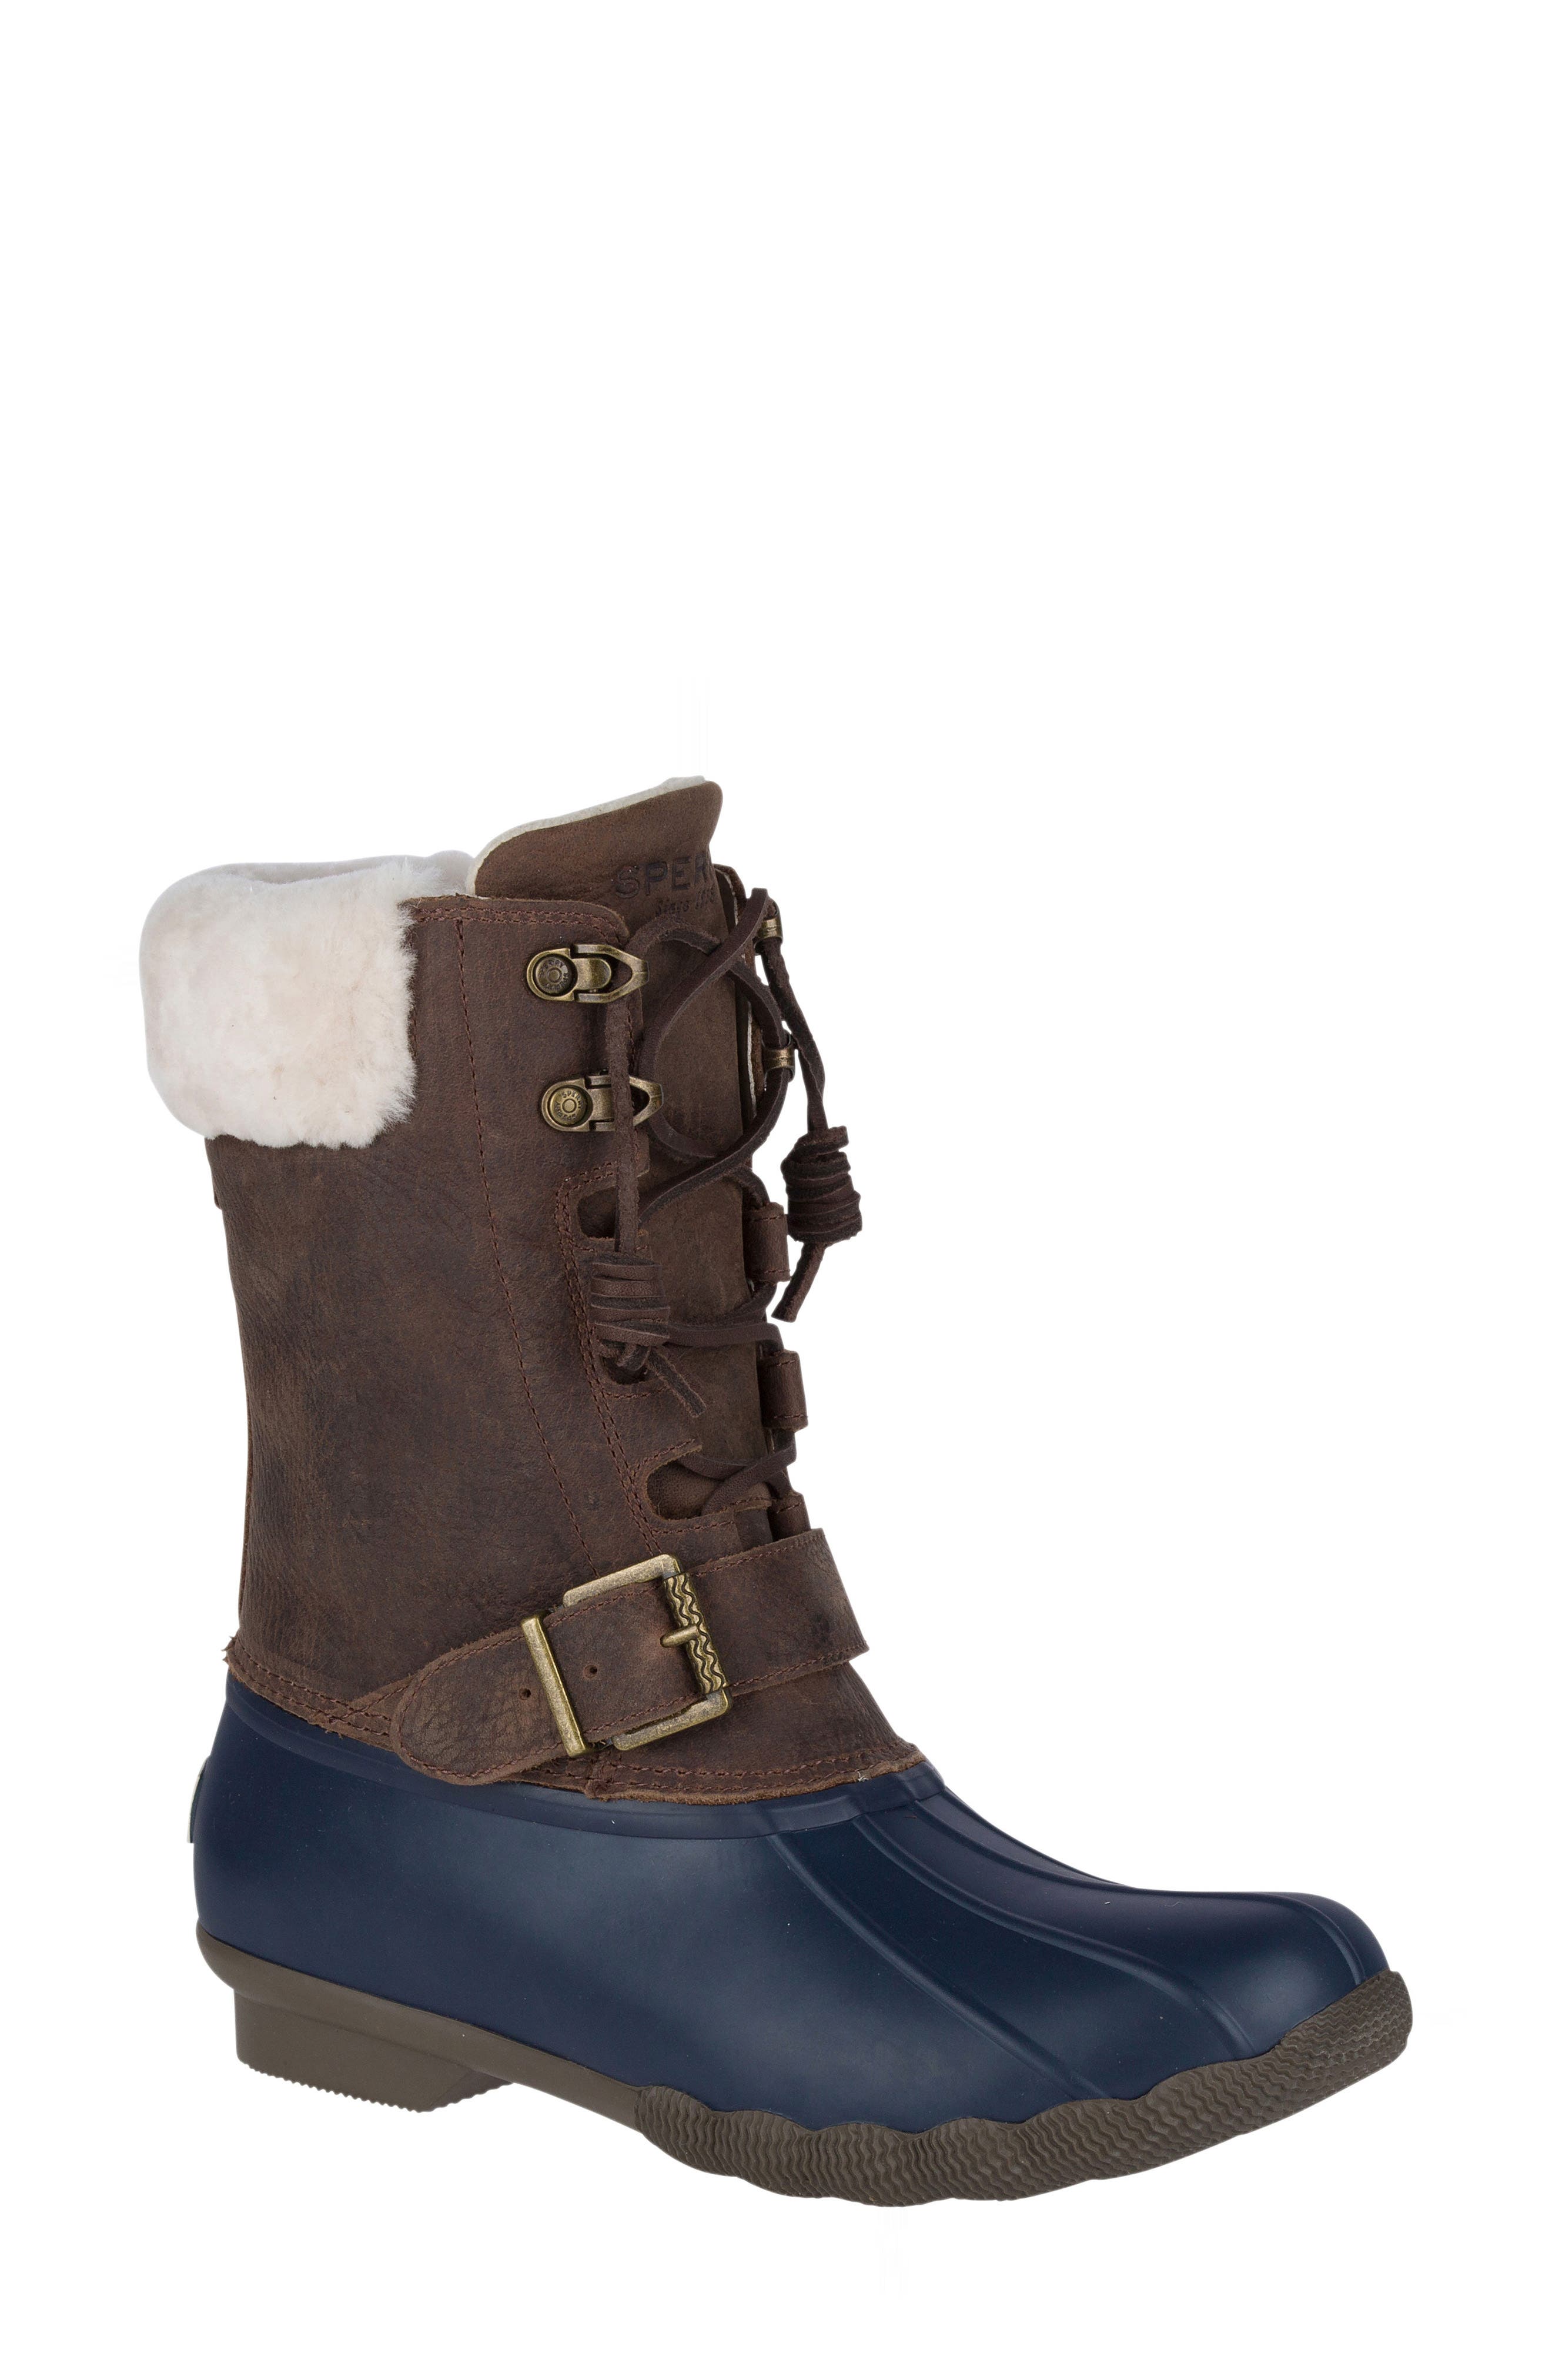 sperry saltwater misty genuine shearling lined duck boot